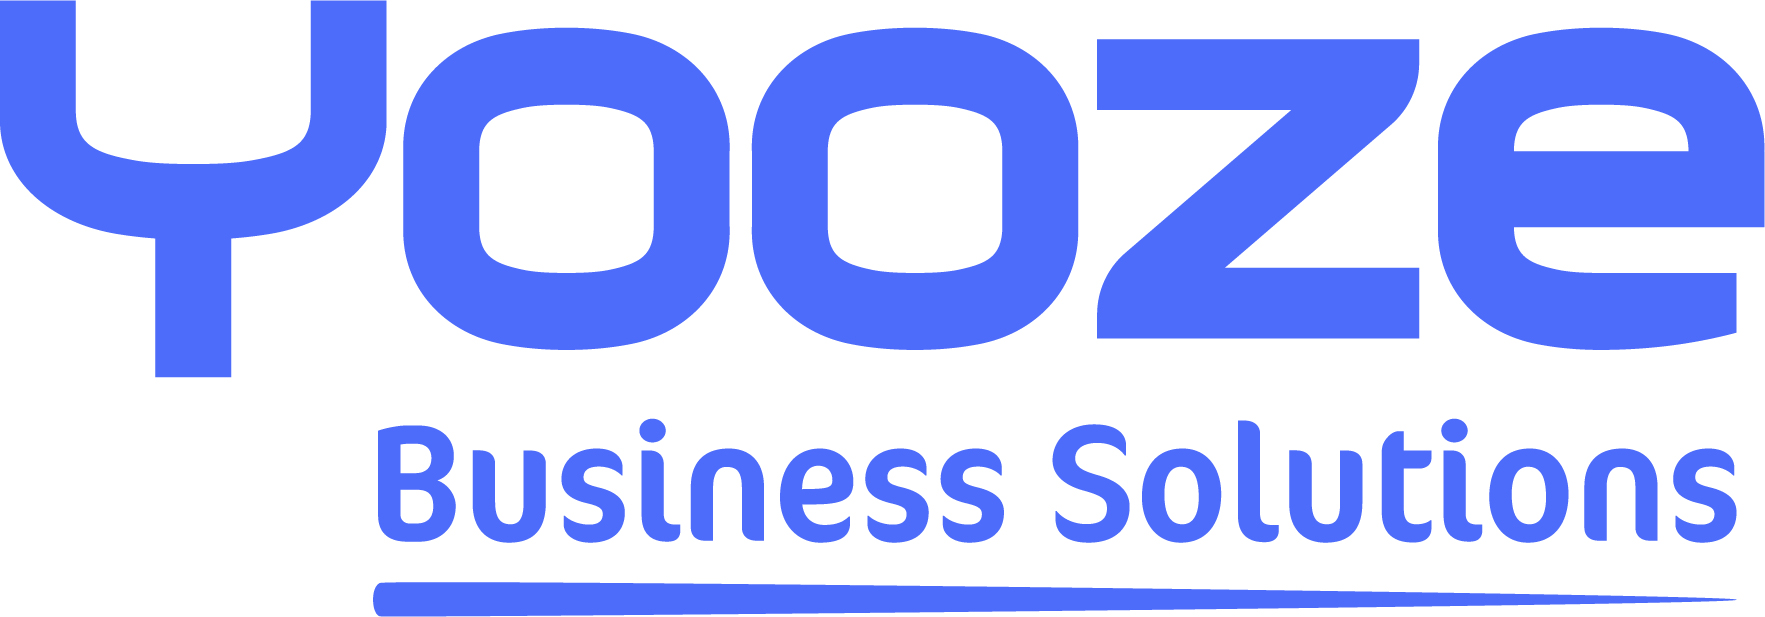 Yooze Business Solutions